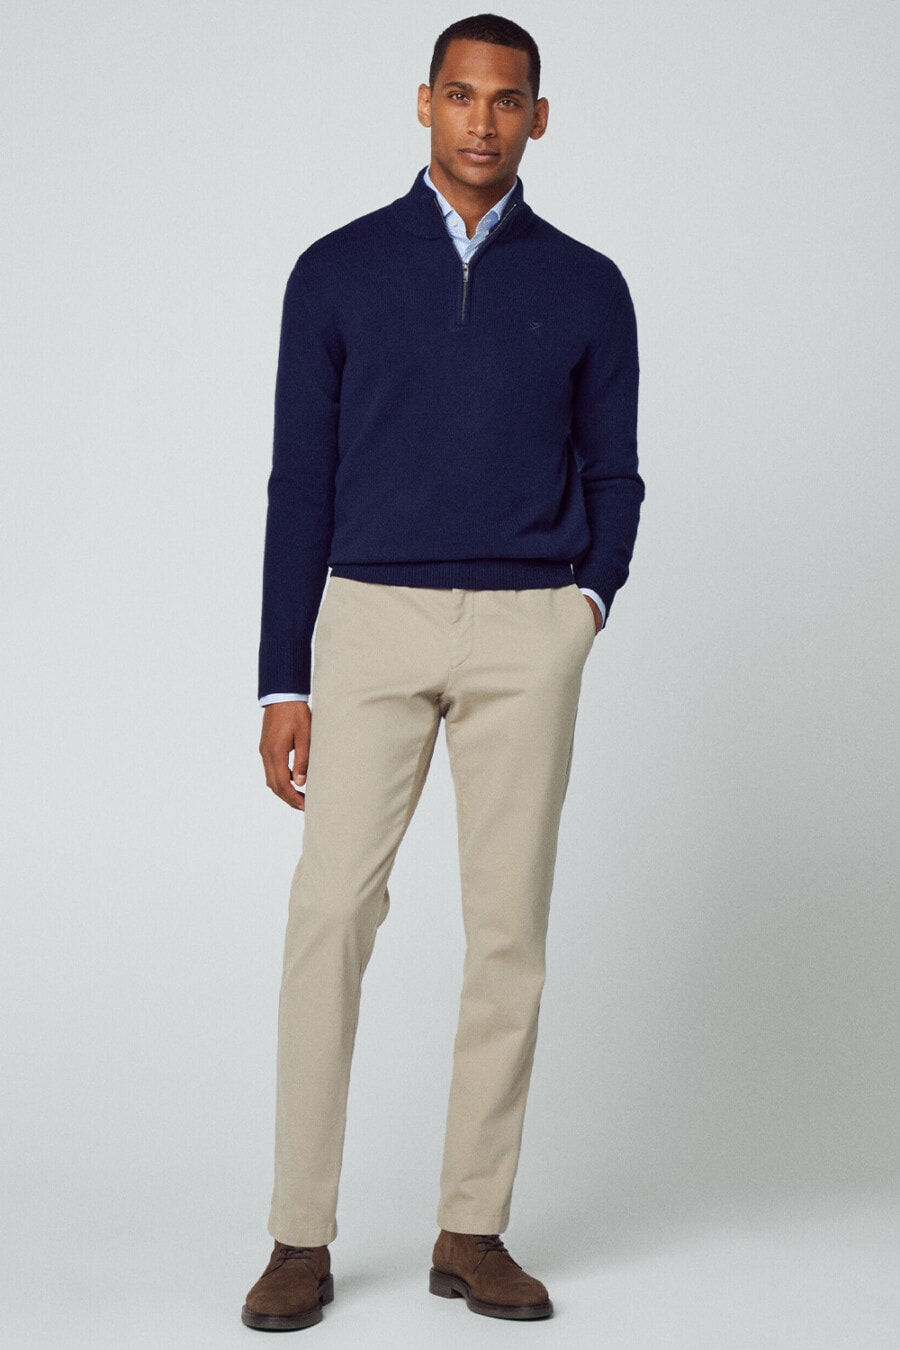 Men's khaki pants, light blue shirt, navy half-zip sweater and brown suede shoes outfit